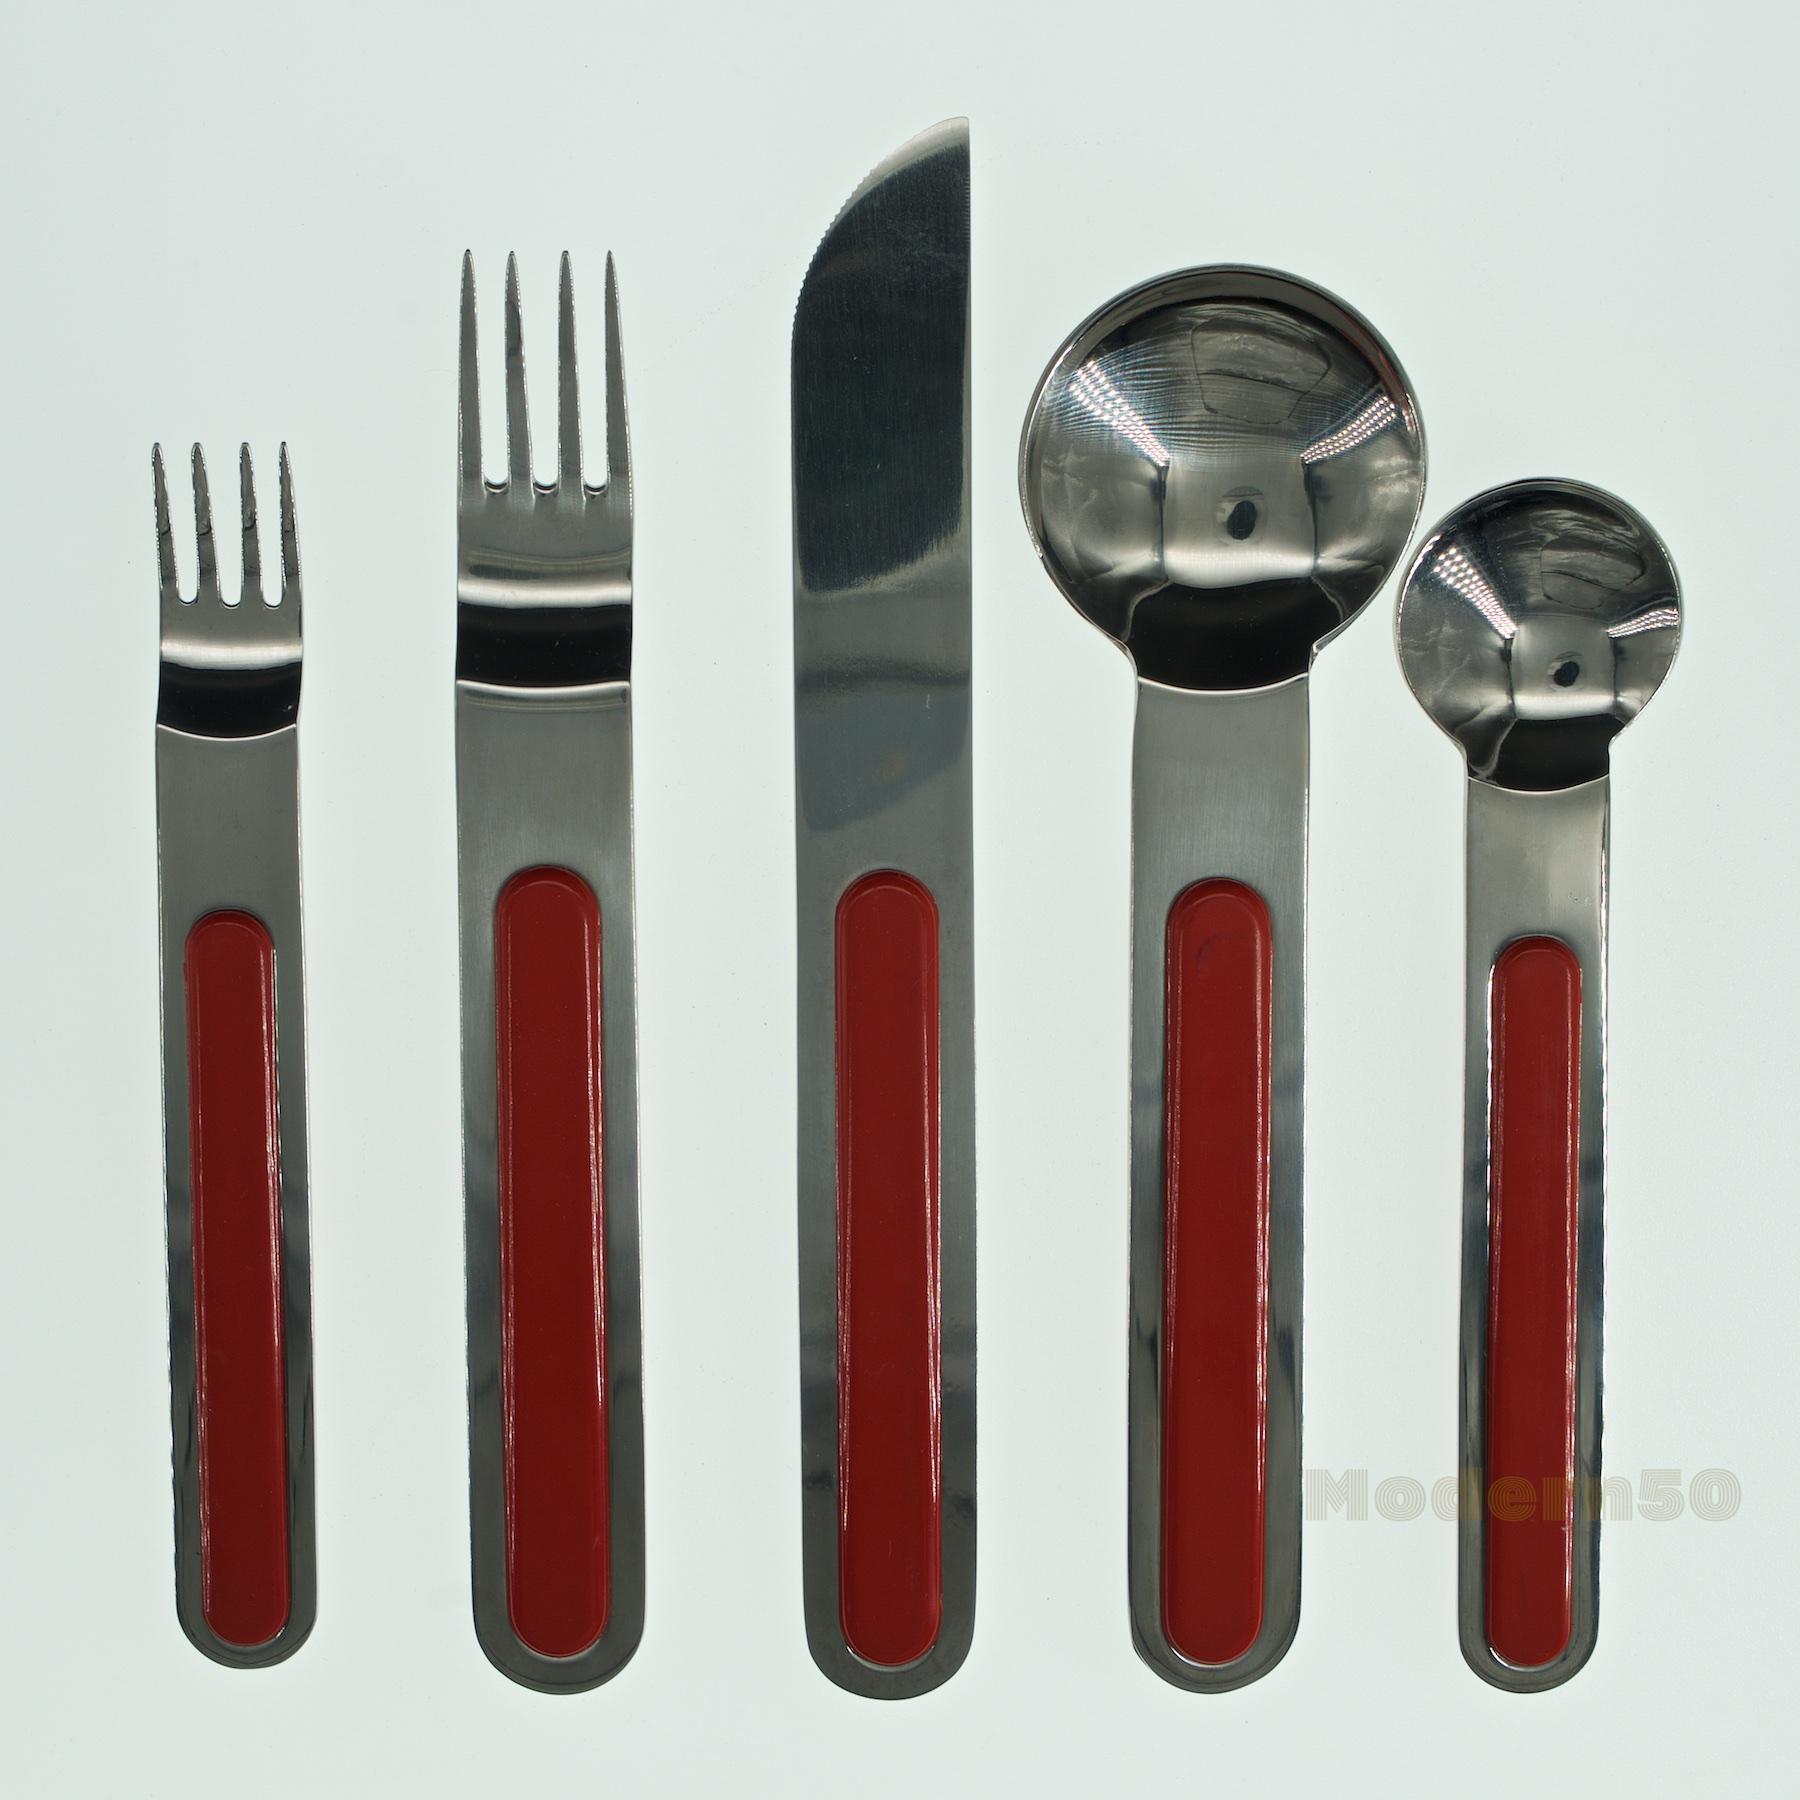 12 sets are available. One set includes; Dinner fork (7 in.,) Dessert/Salad fork (6 in.,) Soup/Table spoon (each measures (7 in.,) Teaspoon (6 in.,) and Dinner knife (7.75 in.) 

Wonderful design, nice functionality. Designed by Sergio Asti in